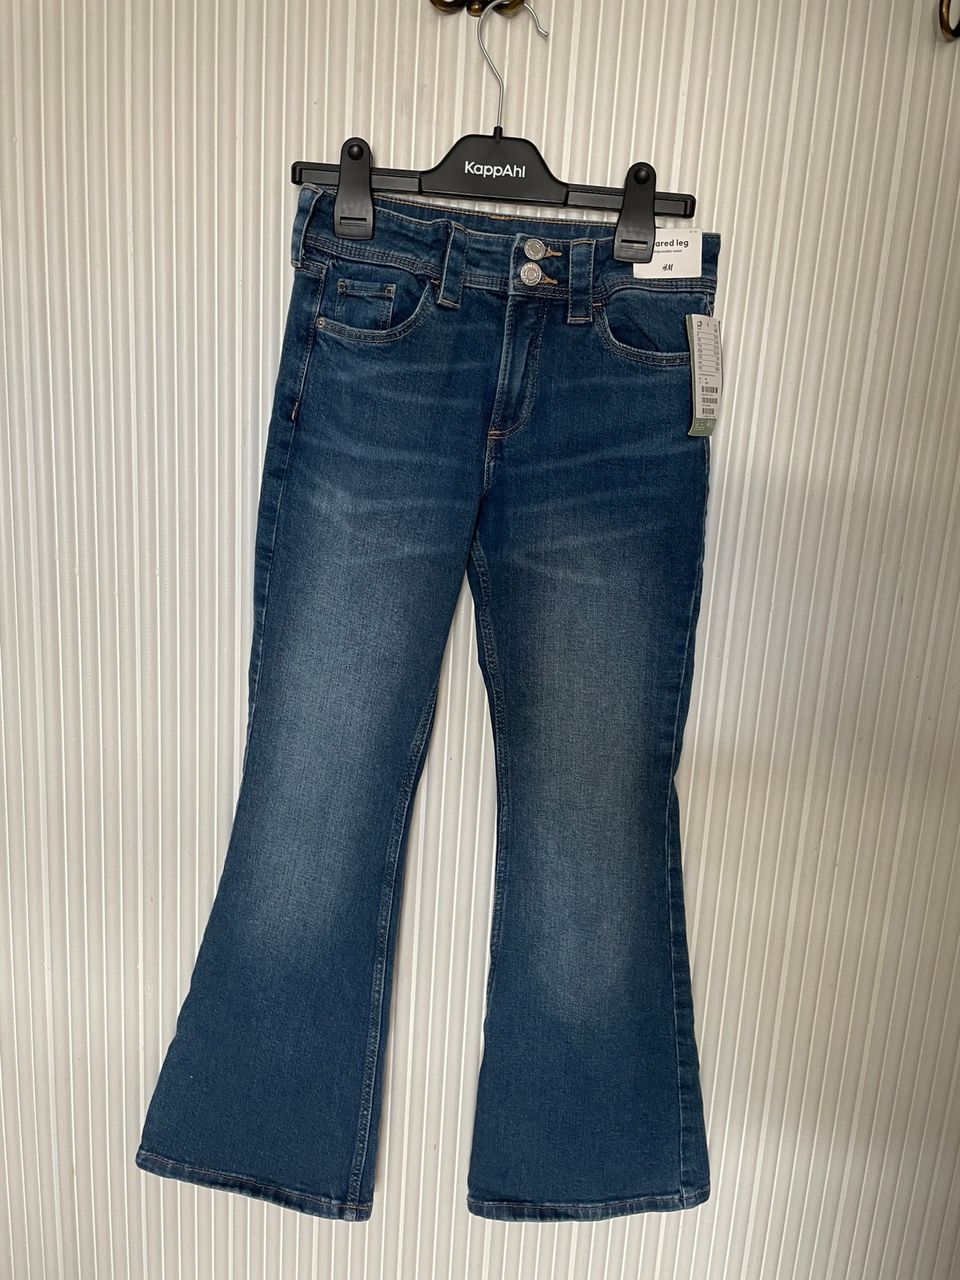 H&M flared jeans 146